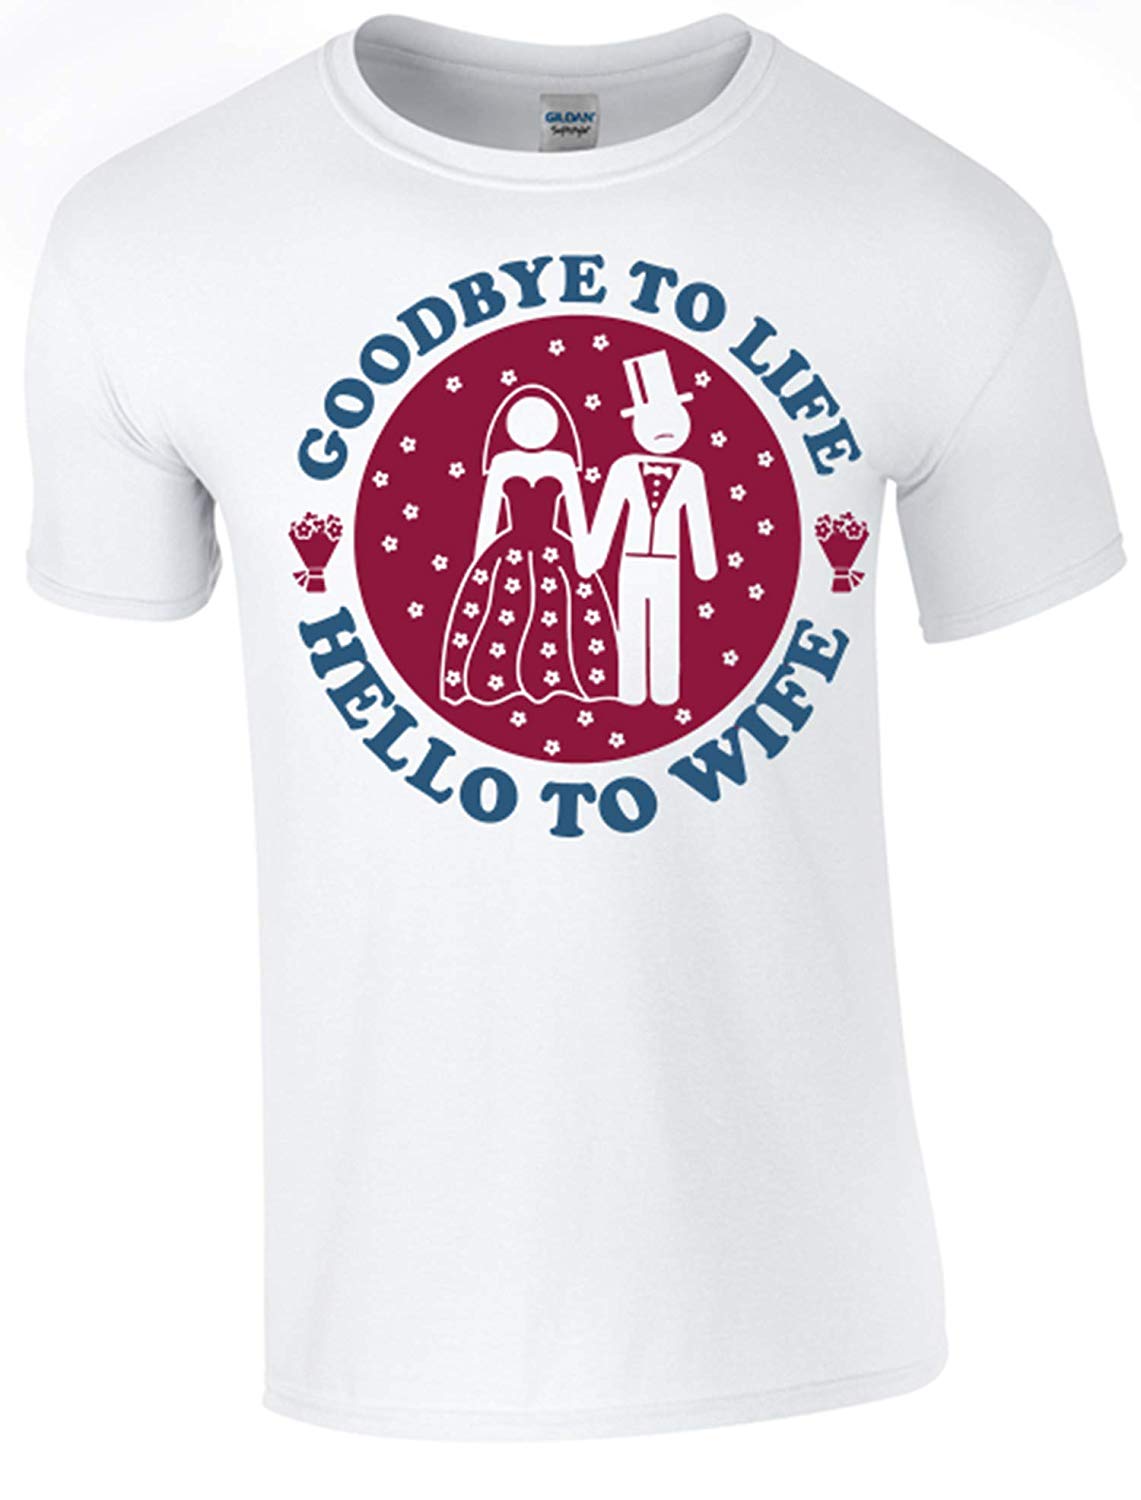 Army 1157 Kit Stag Party - Goodbye to Life, Hello to Wife T-Shirt Printed DTG (Direct to Garment) for a Permanent Finish. - Army 1157 kit XXL Army 1157 Kit Veterans Owned Business